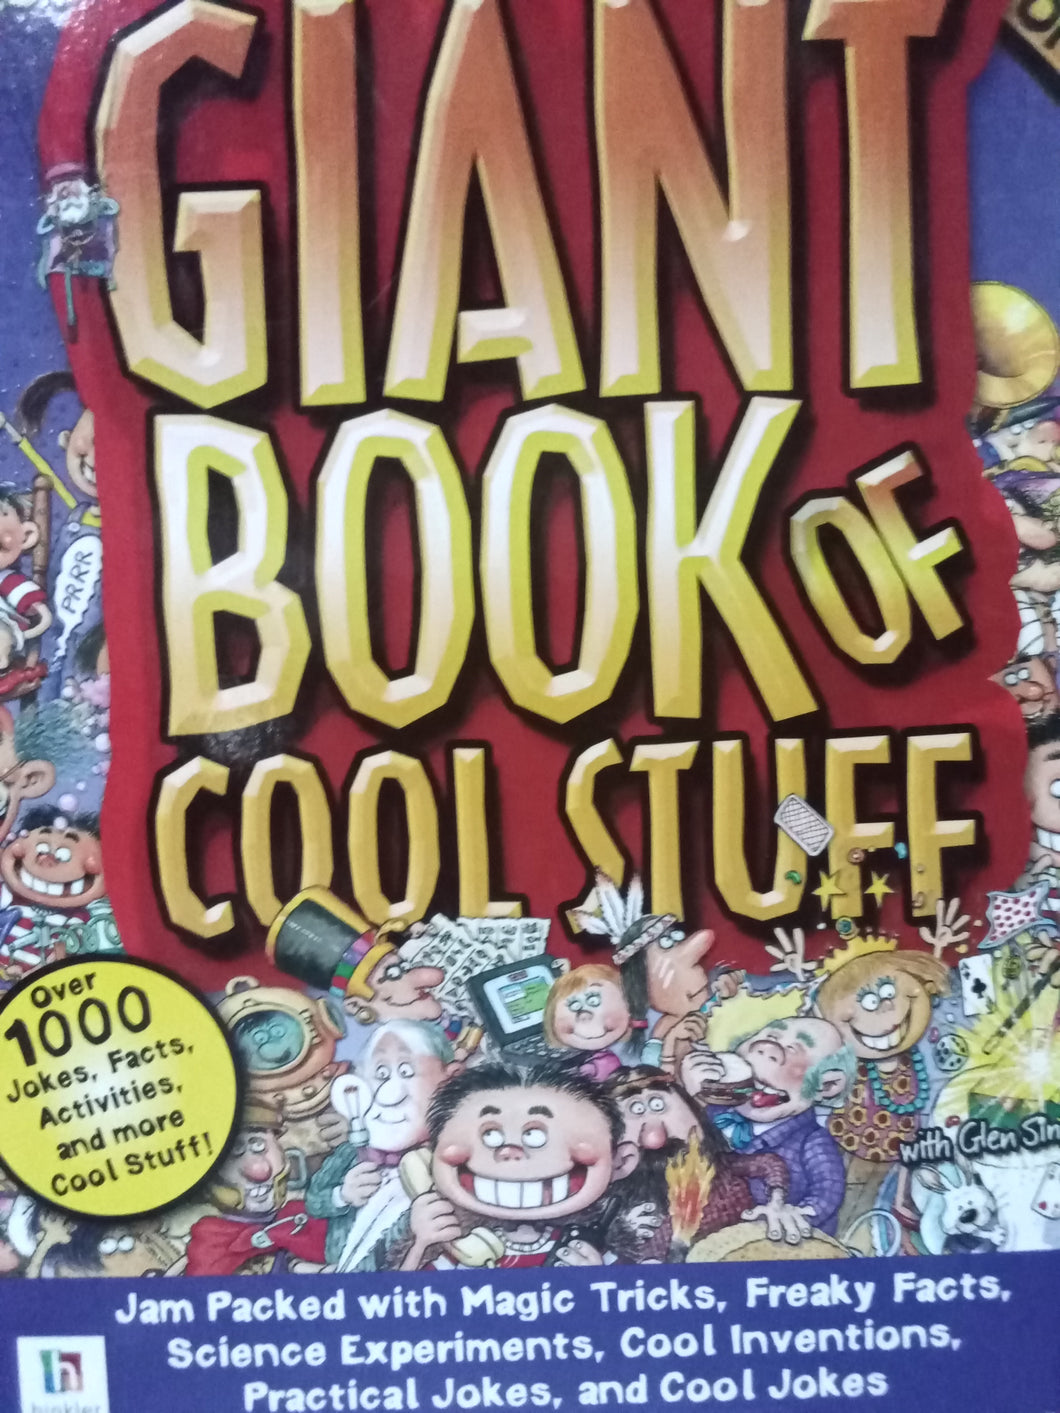 Giant Book Of Cool Stuff